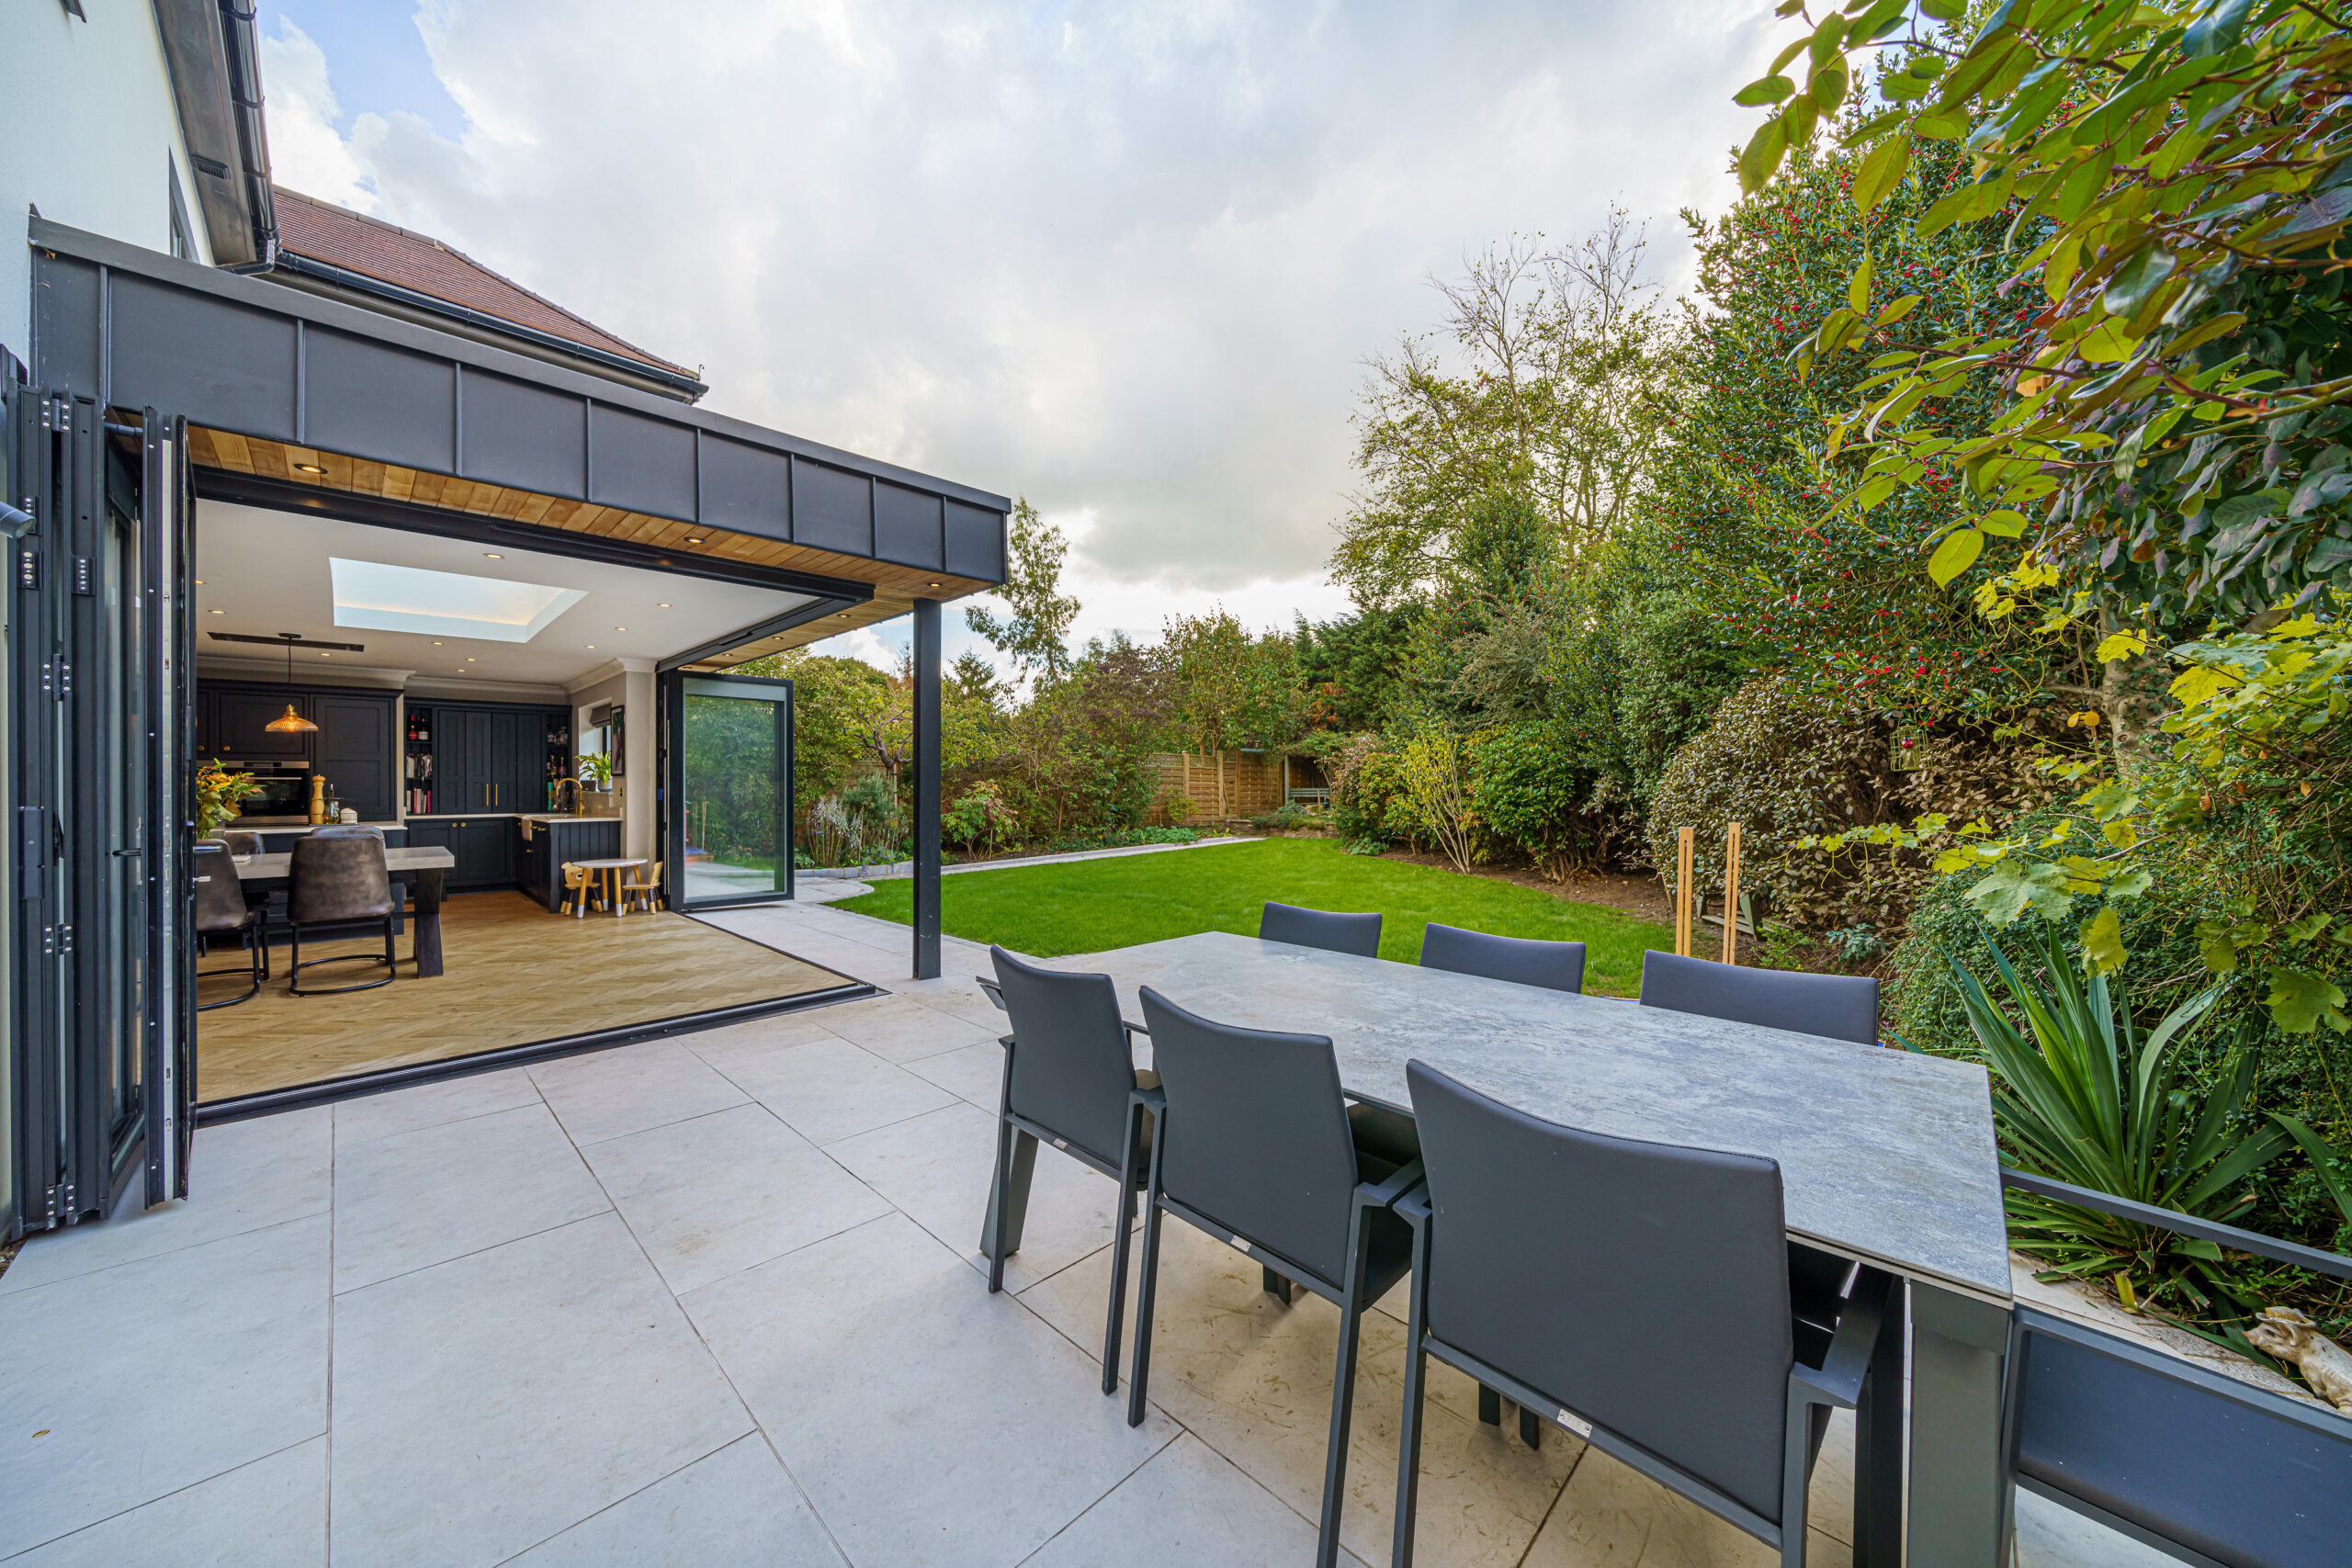 How Much Does a Home Extension Cost?